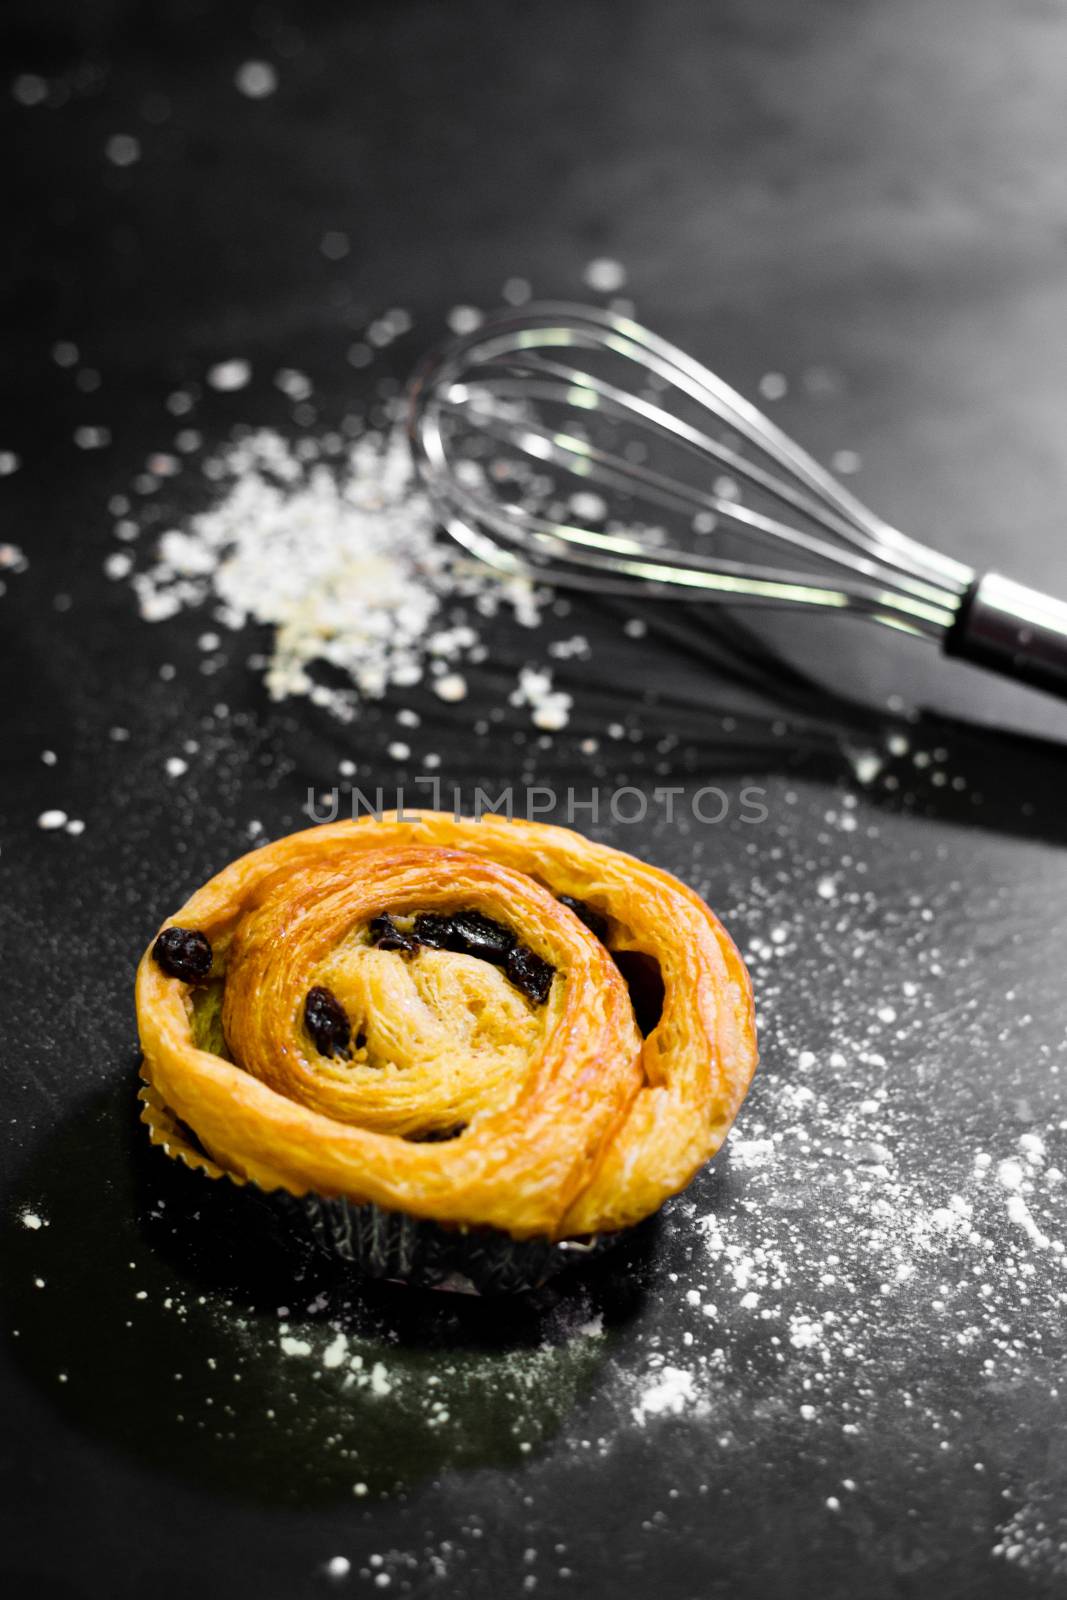 Raisin Bread on a black background, Cinnamon Roll, Butter and Raisin, Homemade Fresh Bakery Idea, Image from the top view